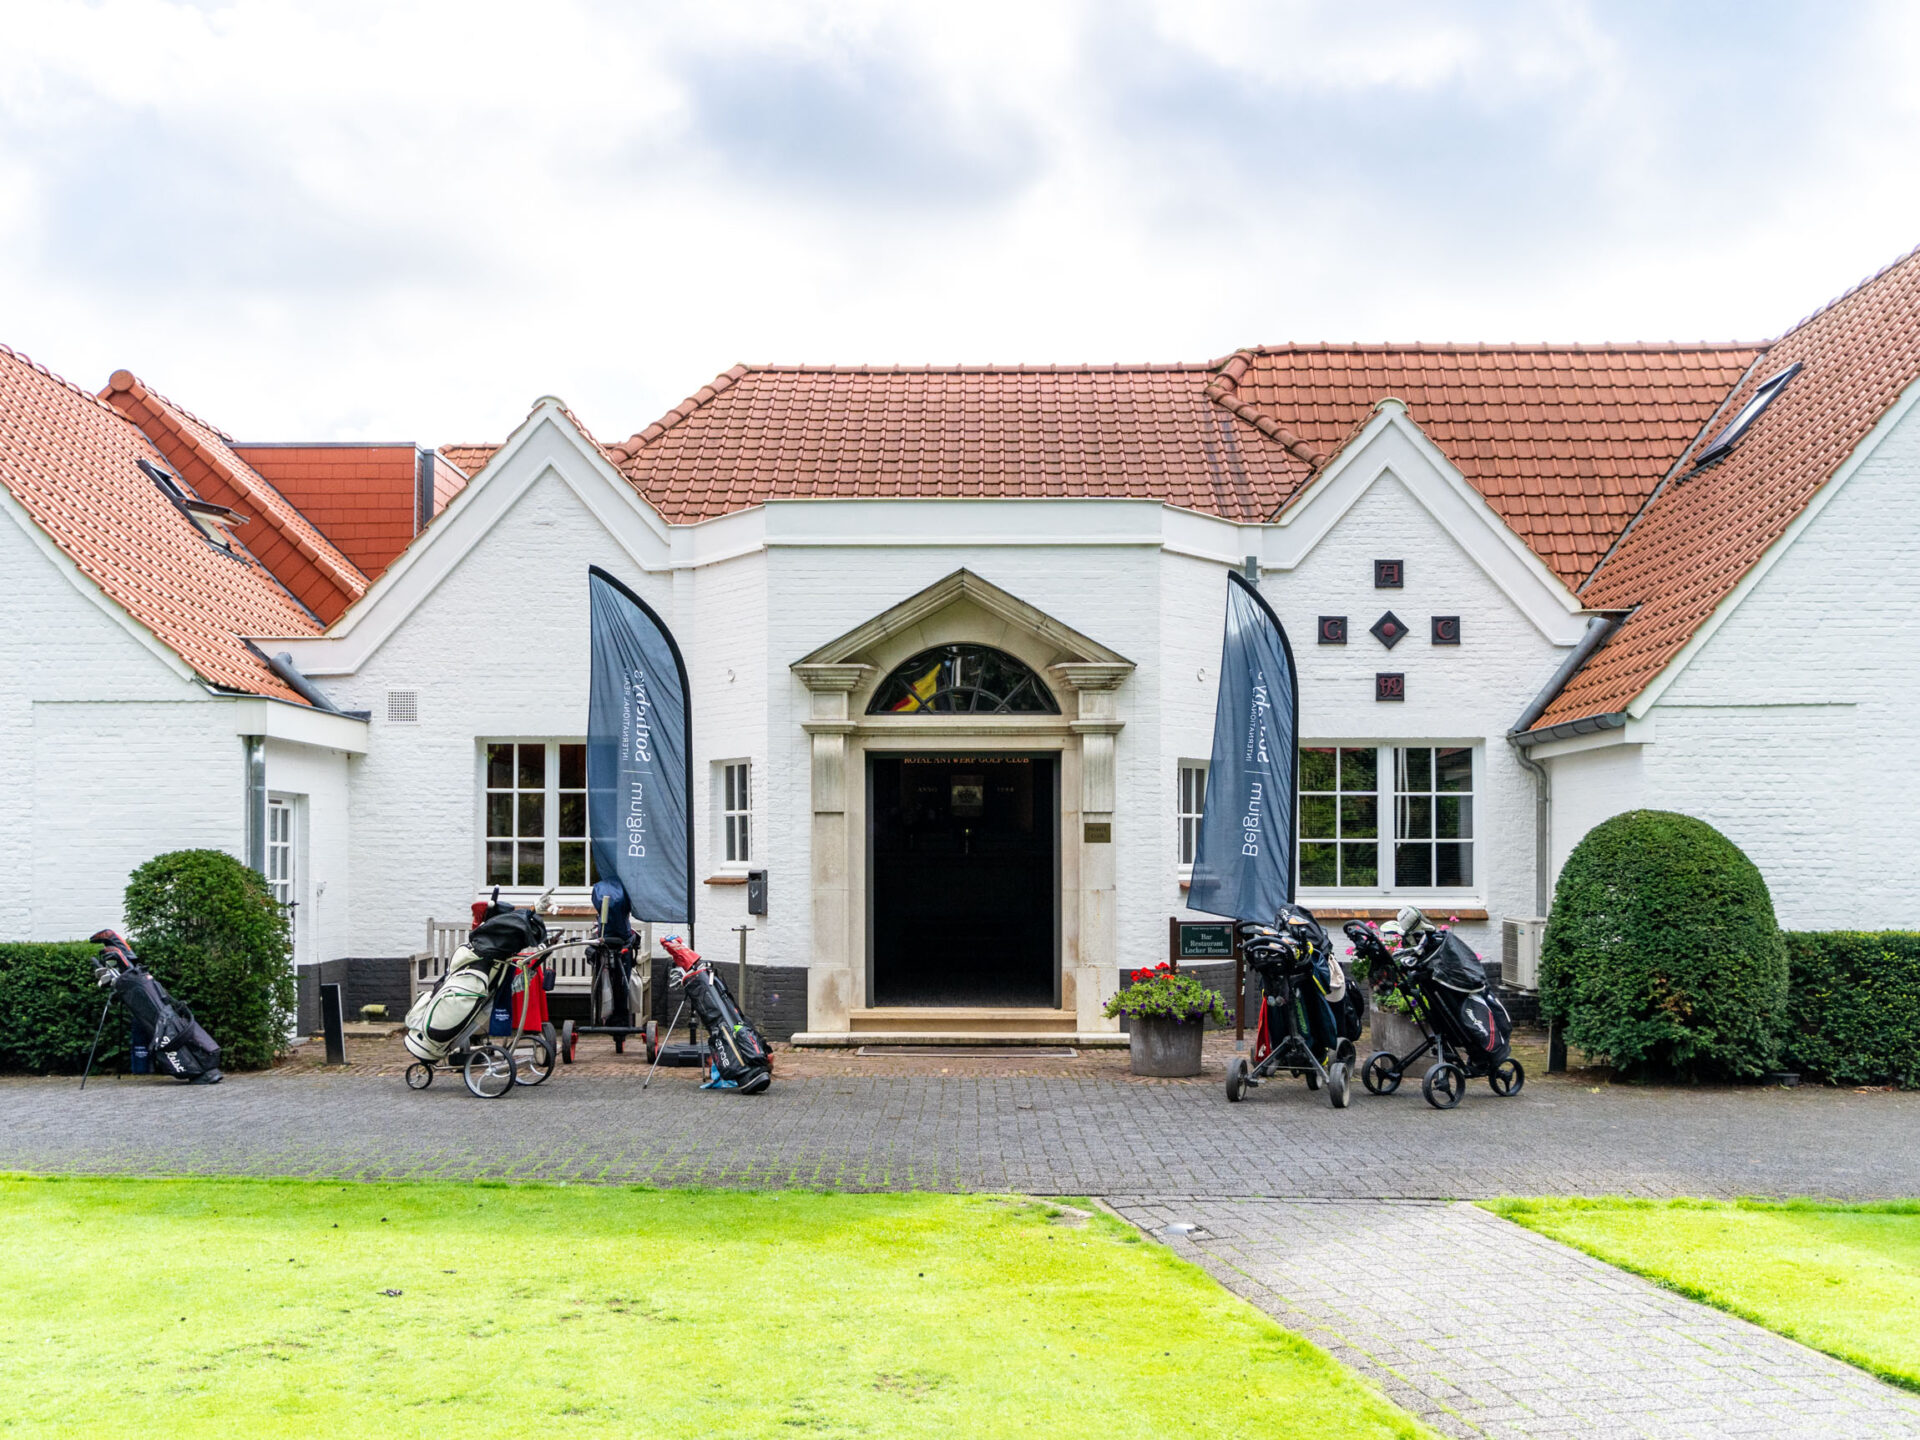 Belgium Sothebys Int. Realty Sotheby’s Realty’s very first Golf Tournament in Antwerp: A Day of Luxury and Sport